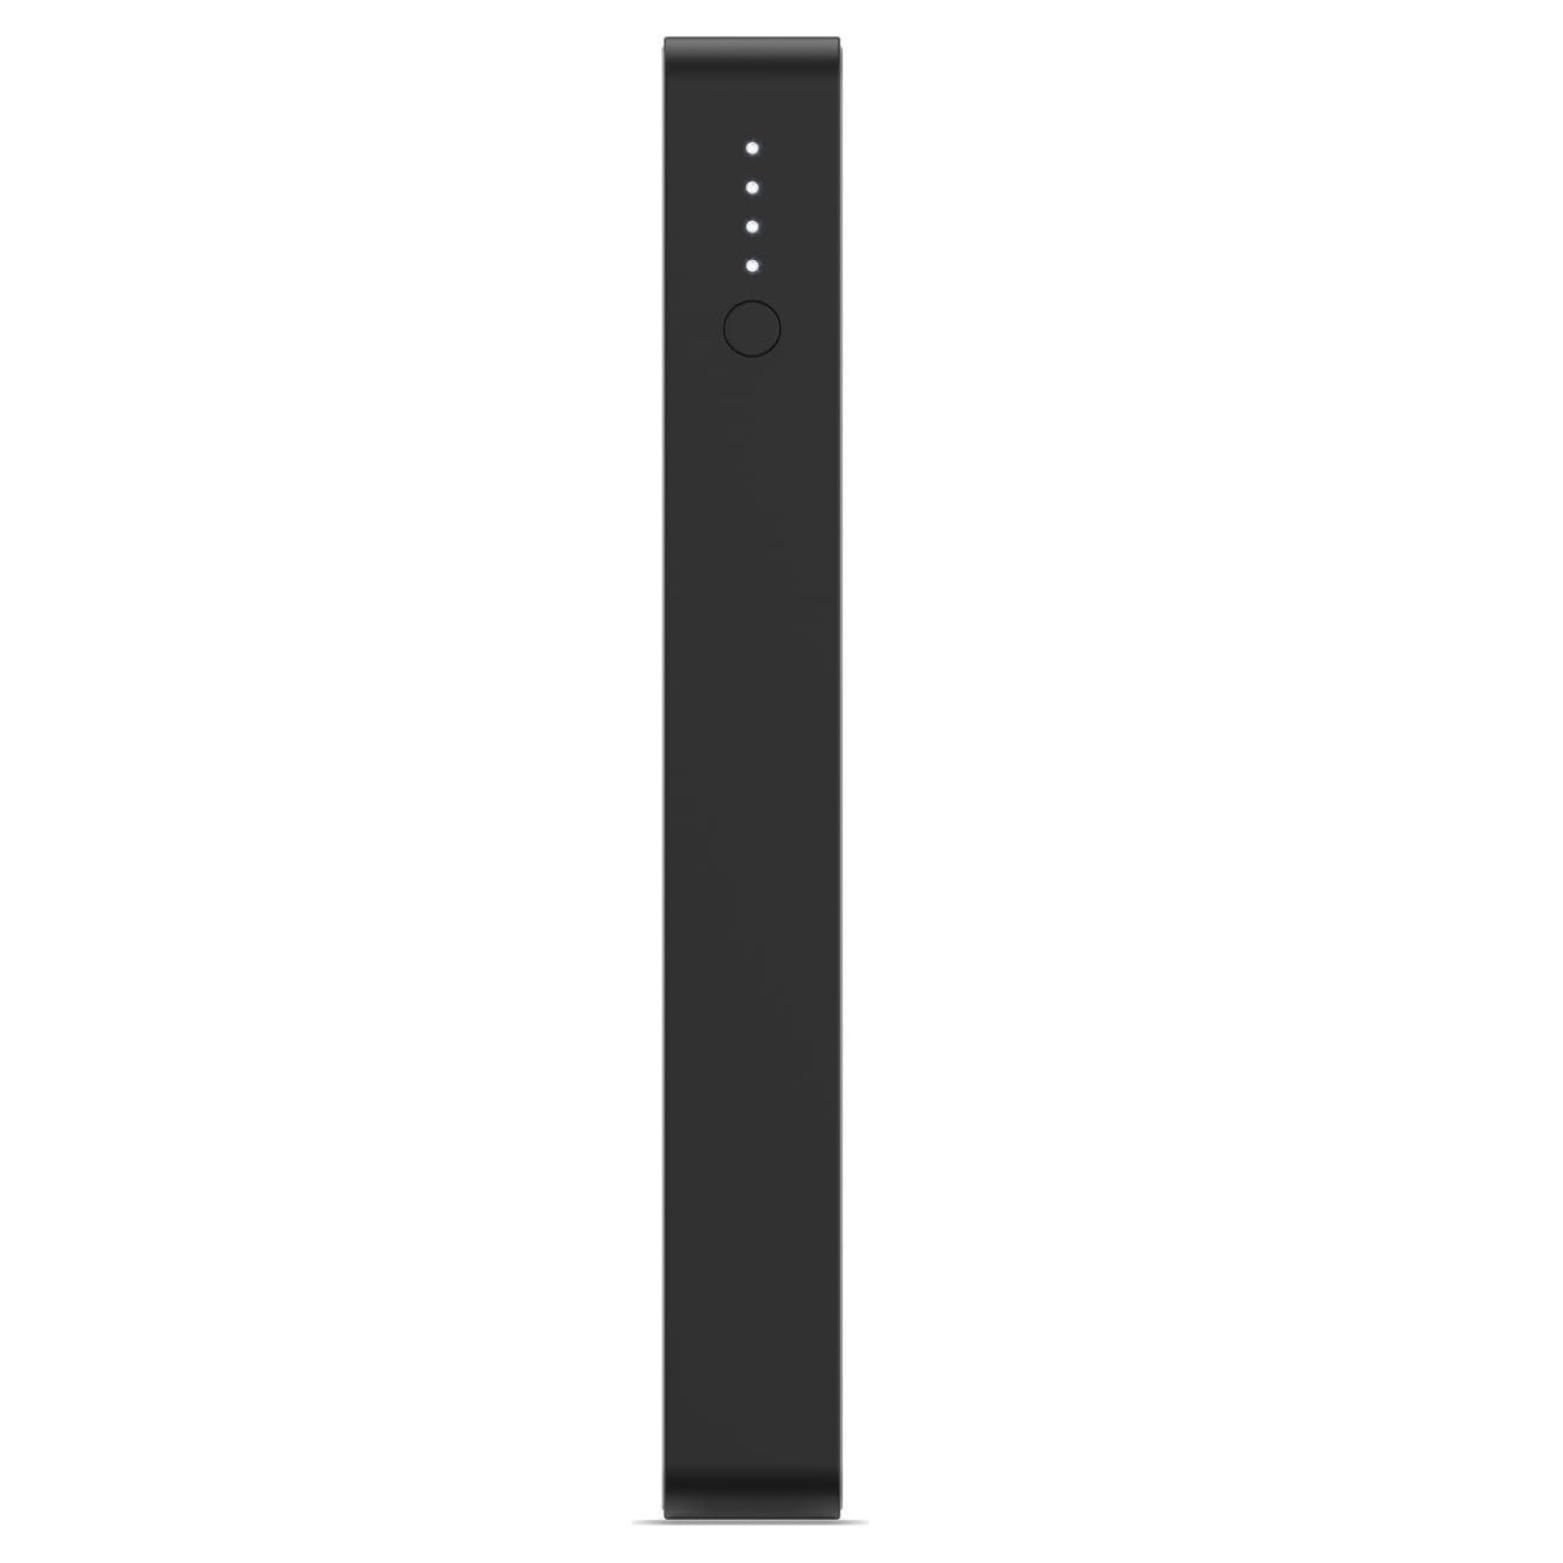 Space Grey Mophie USB C Power Station Side View